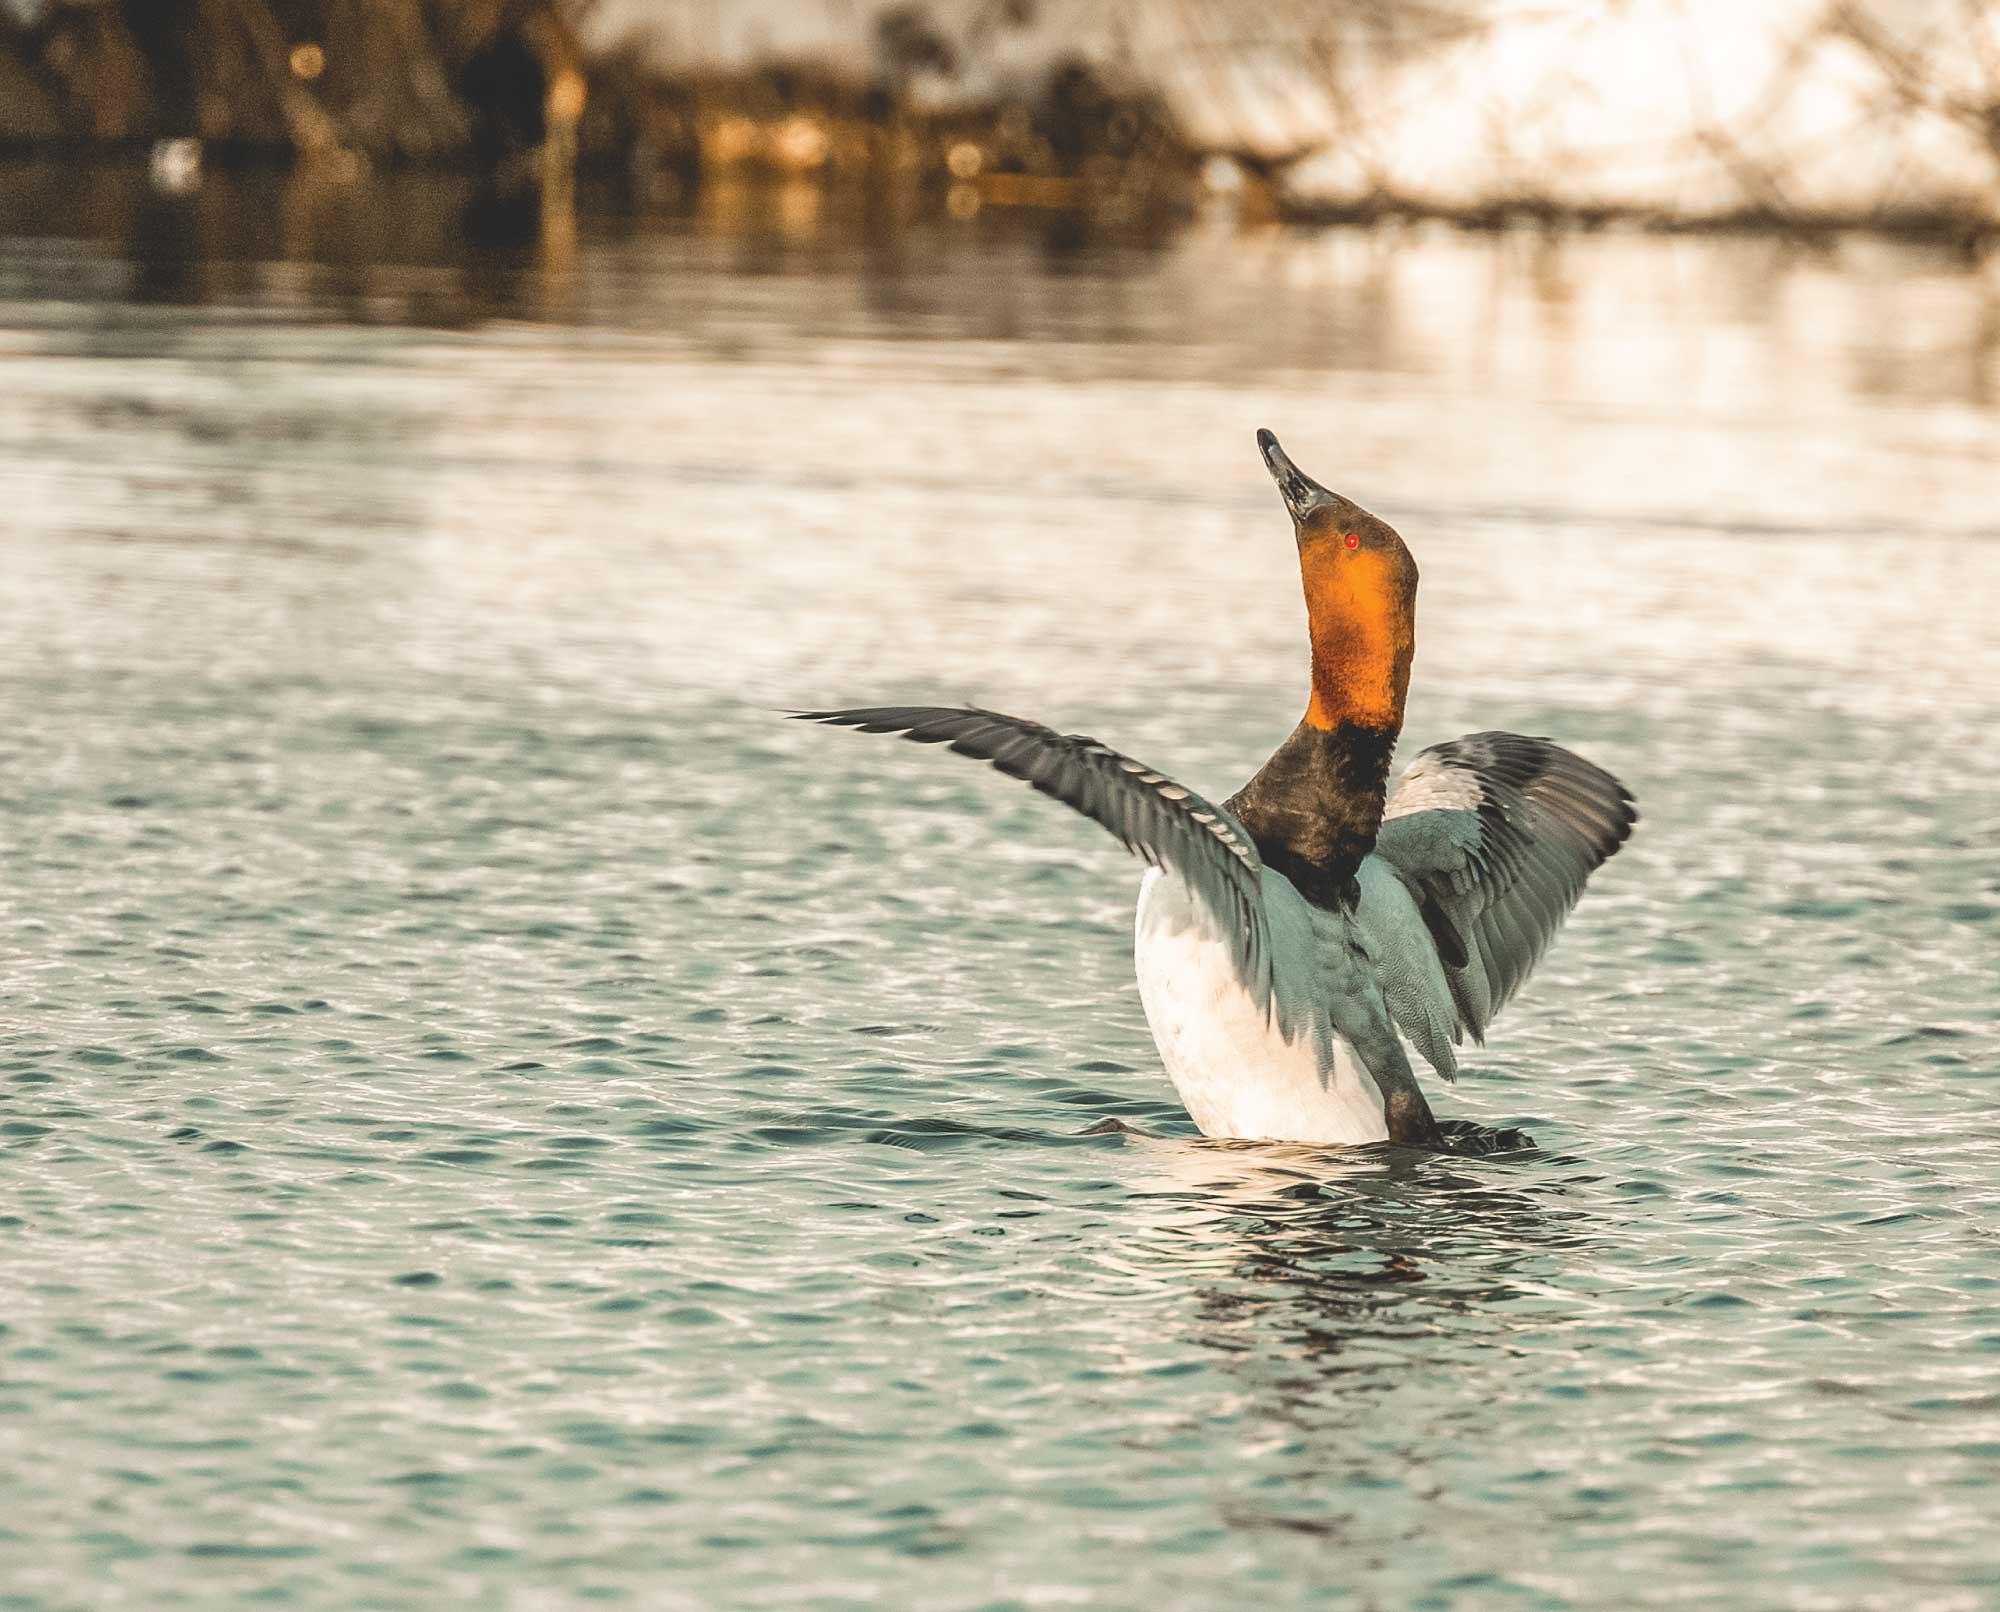 A male canvasback duck stretches his wings on a pond